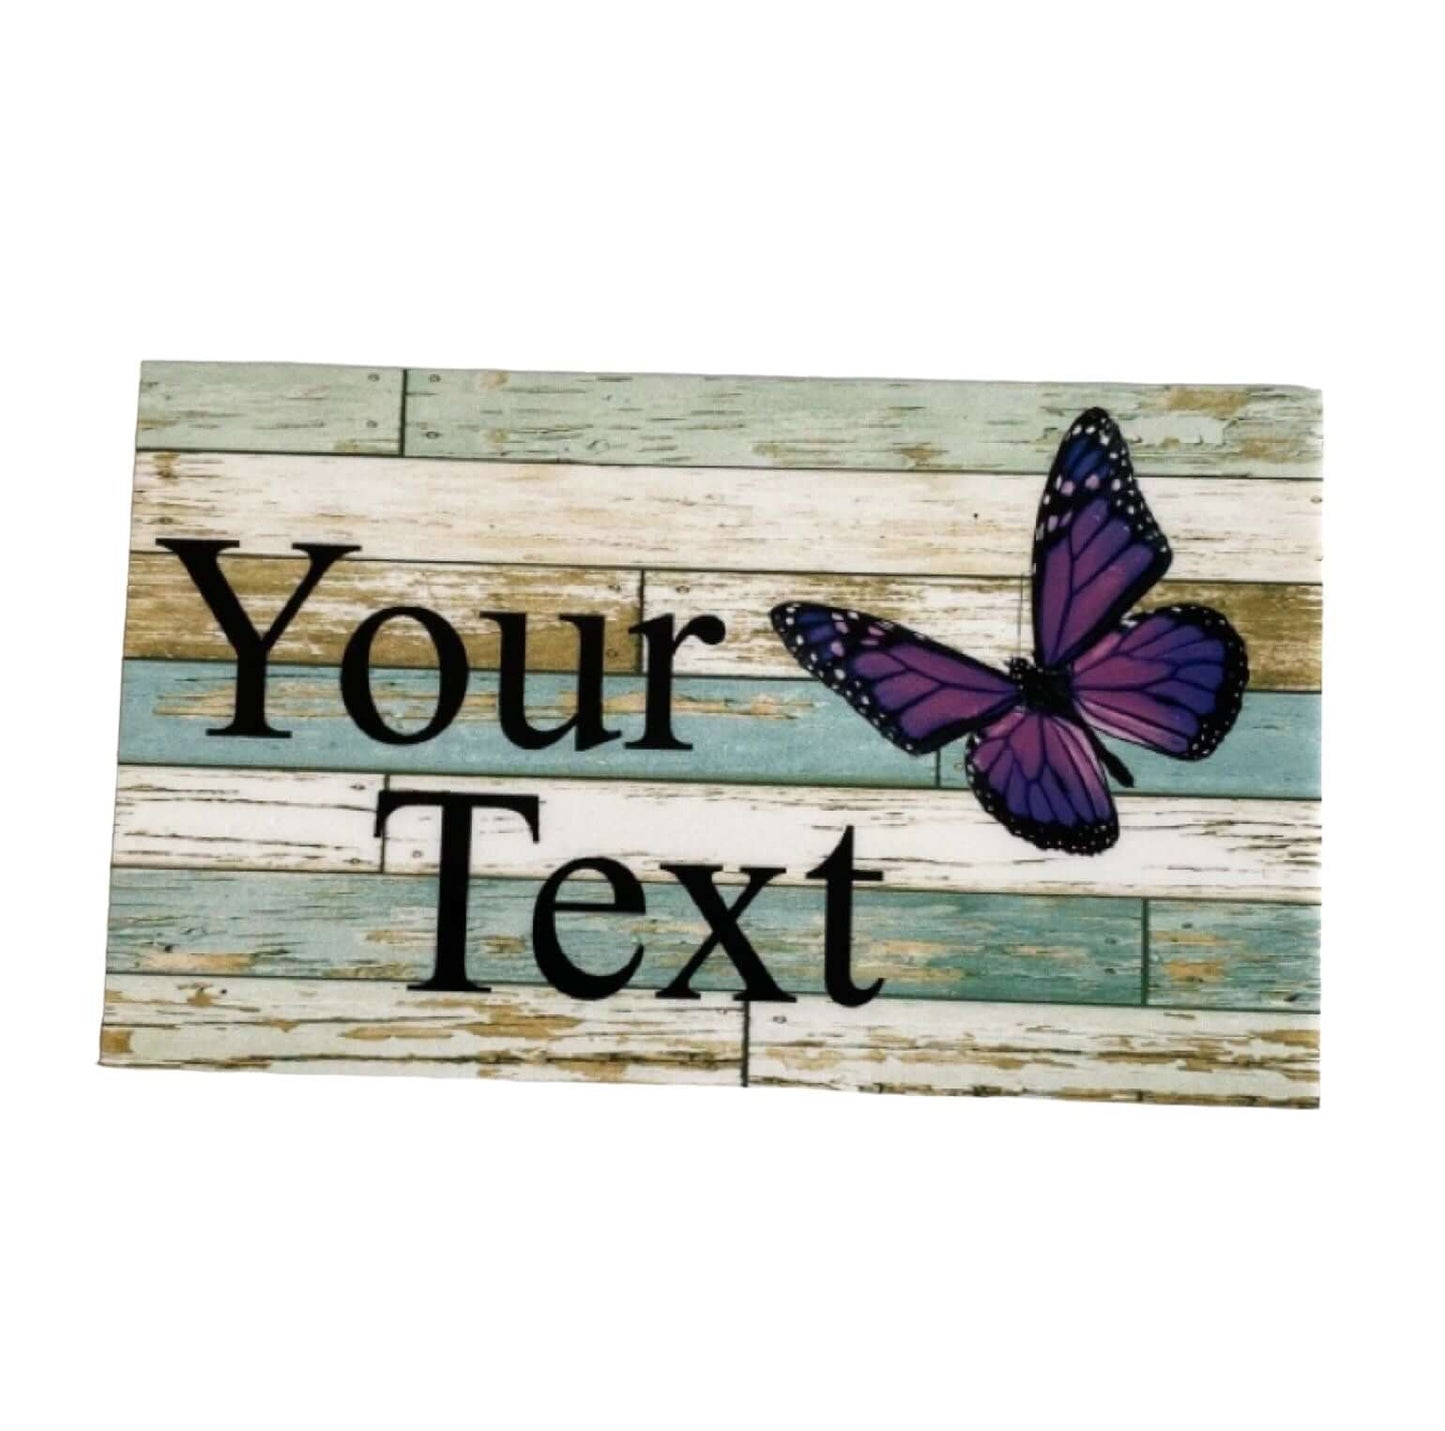 Butterfly Garden Custom Personalised Sign - The Renmy Store Homewares & Gifts 